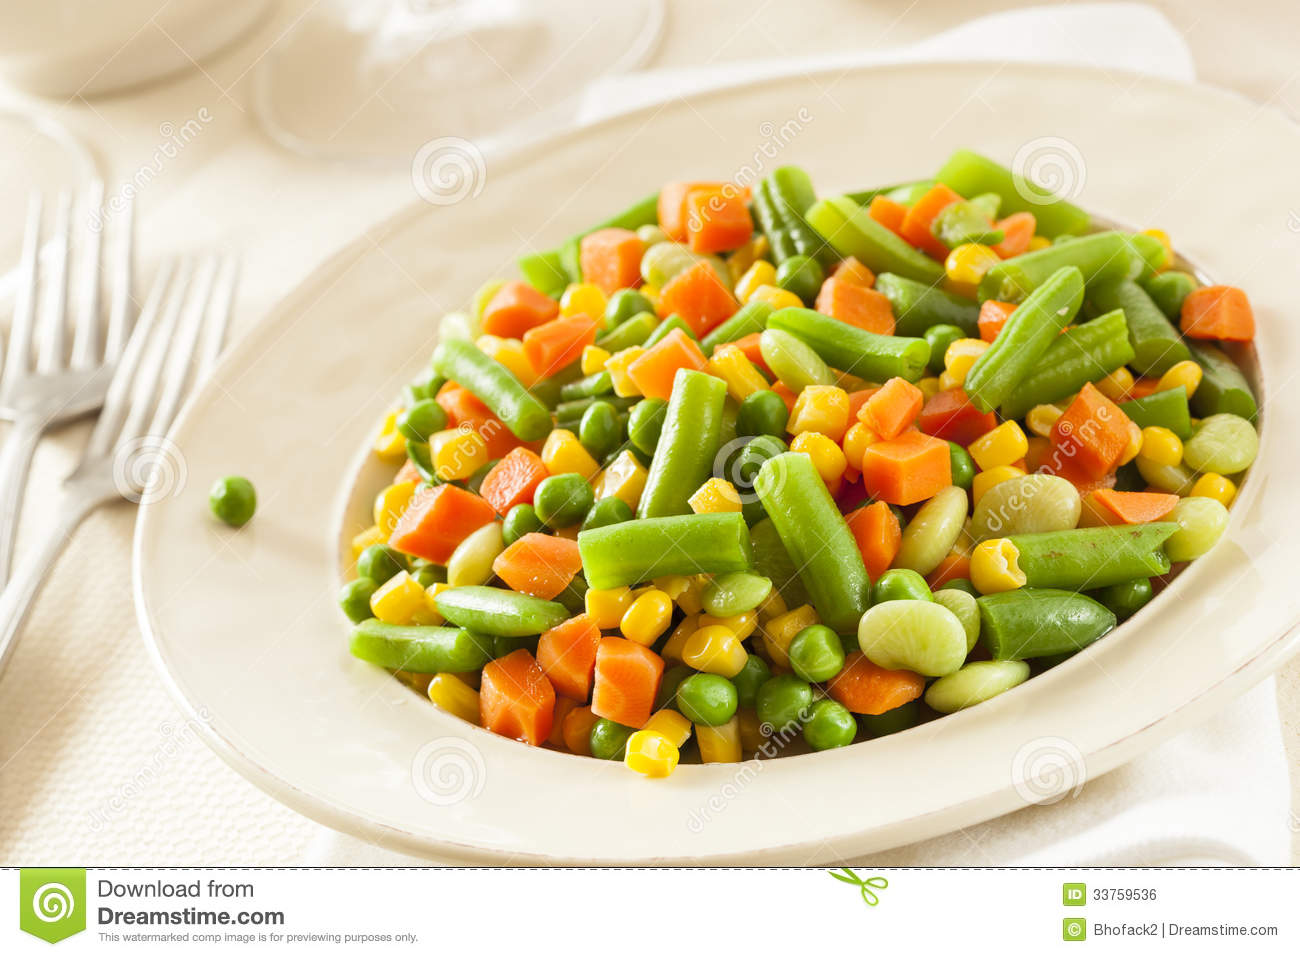 Steamed Organic Vegetable Medly With Peas Corn Beans And Carrots